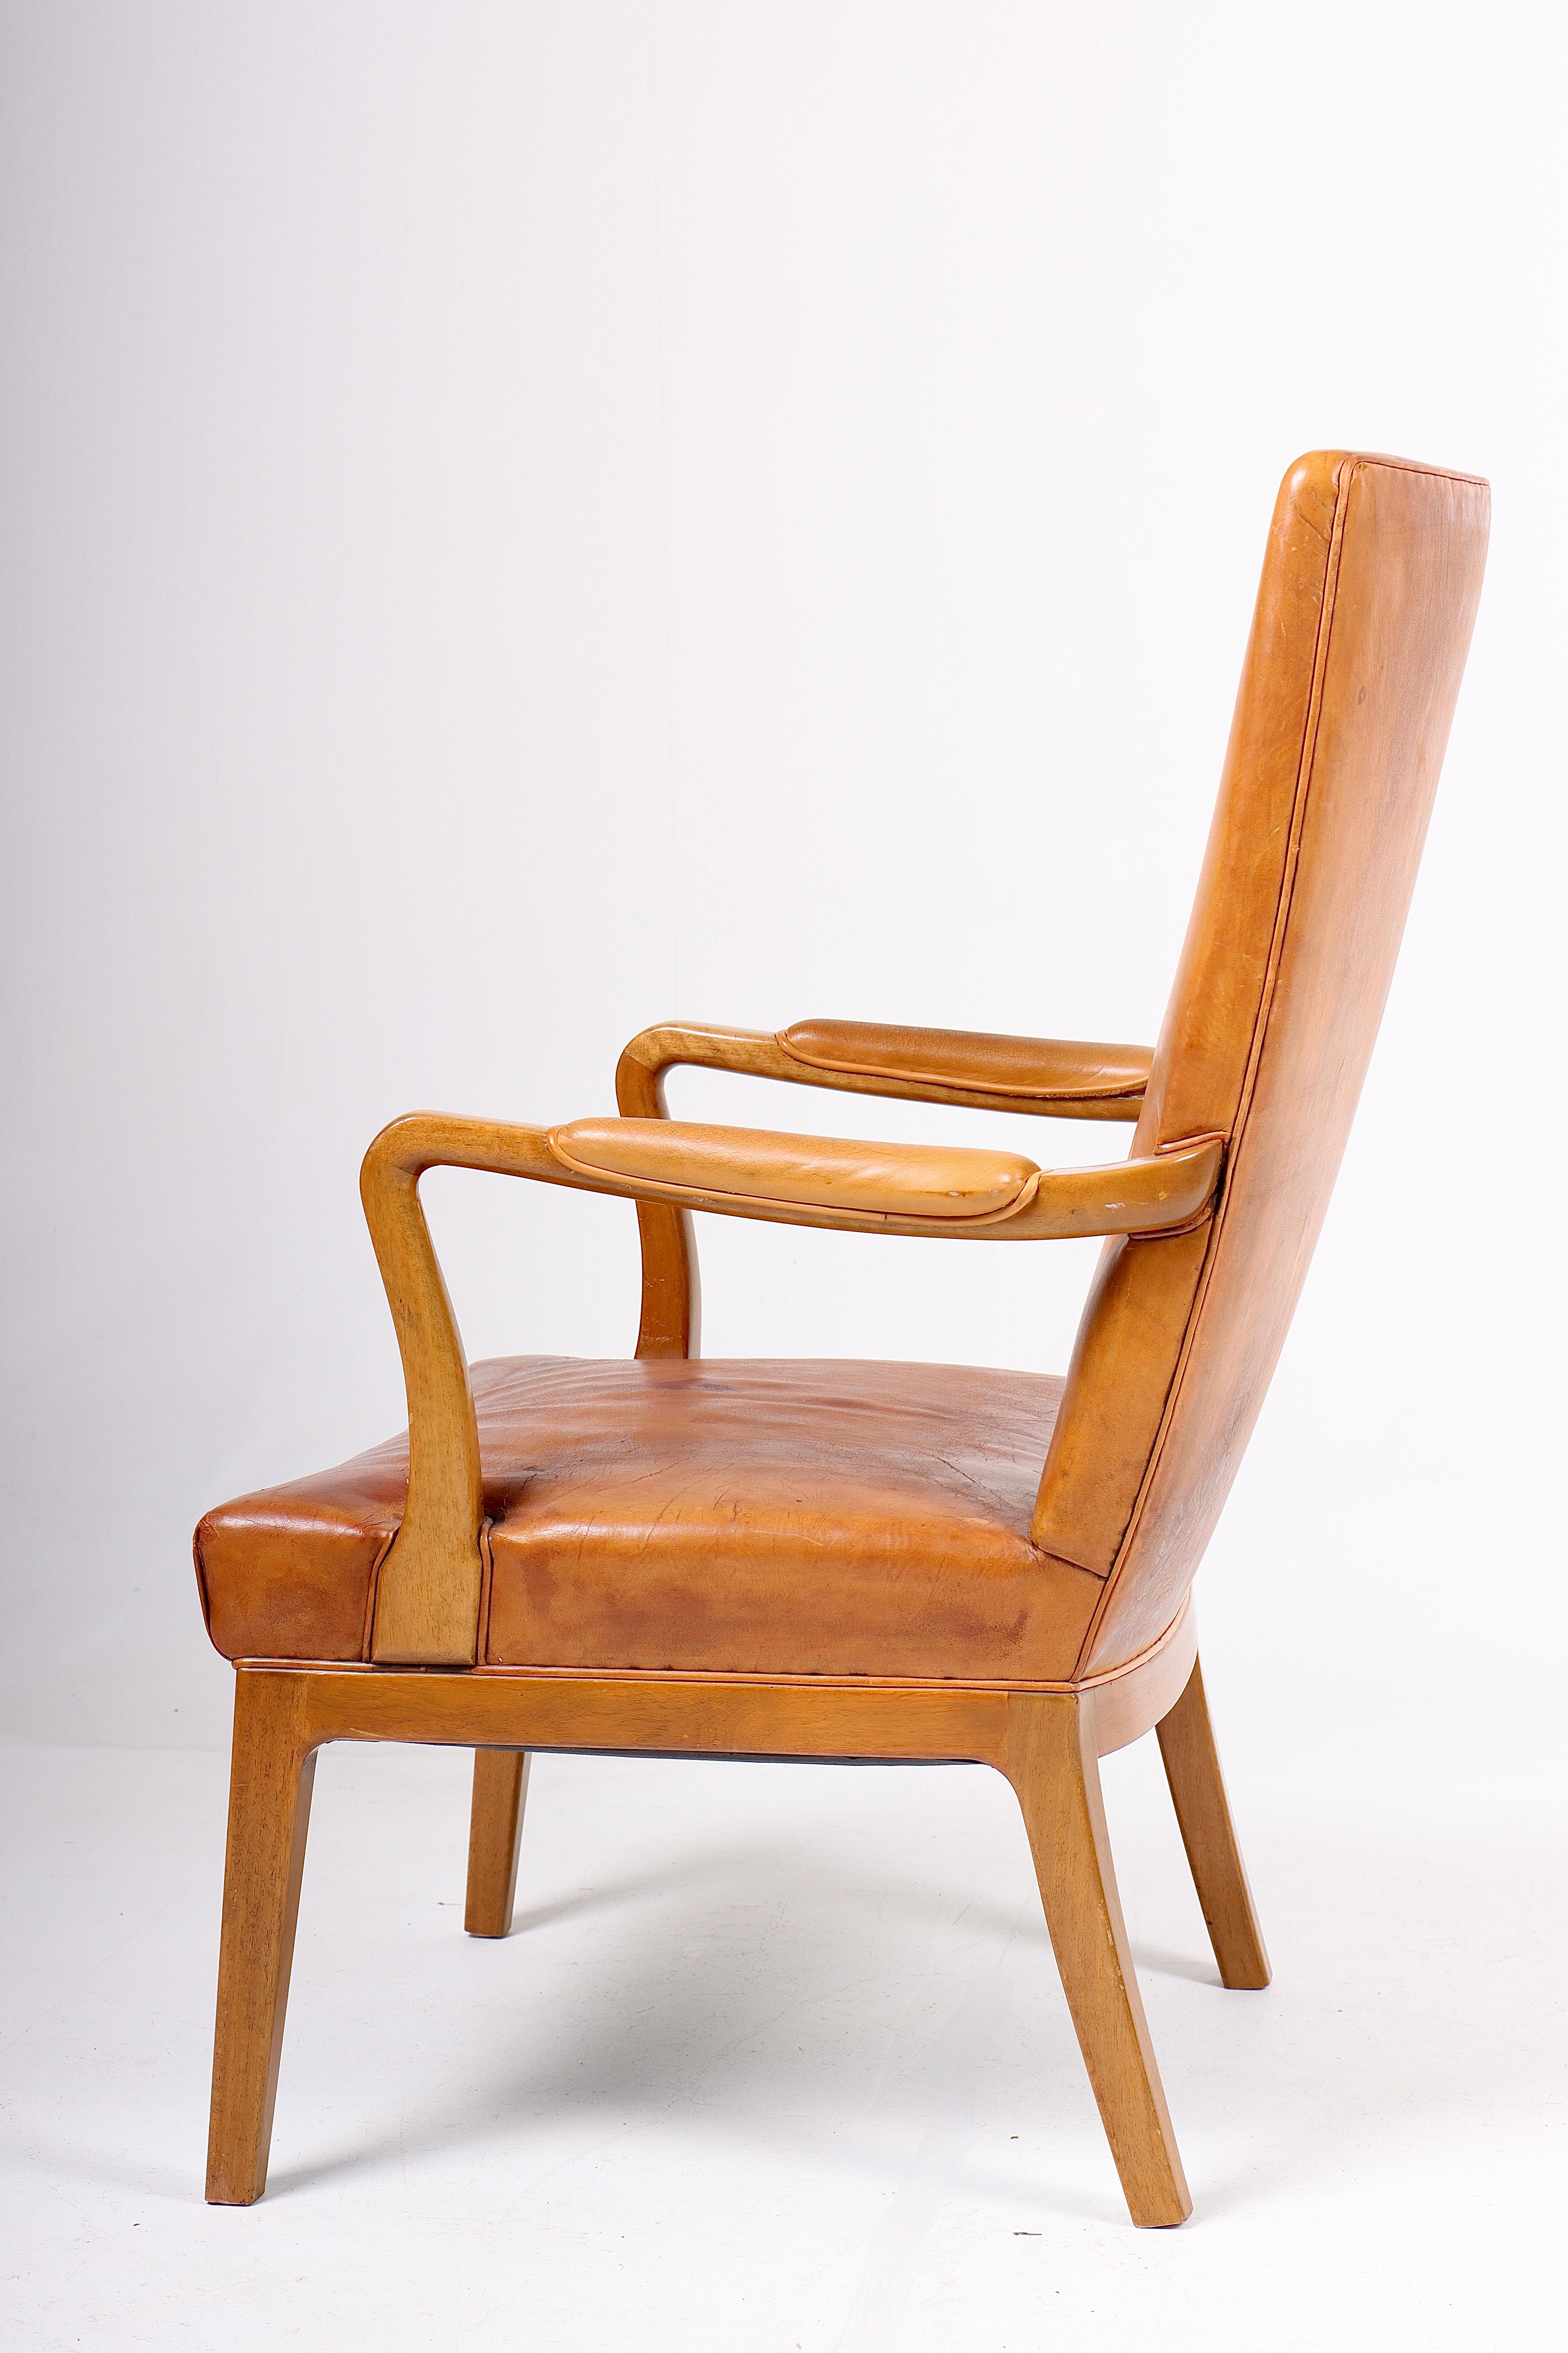 Danish Armchair in Patinated Leather by Lysberg Hansen & Terp, 1940s